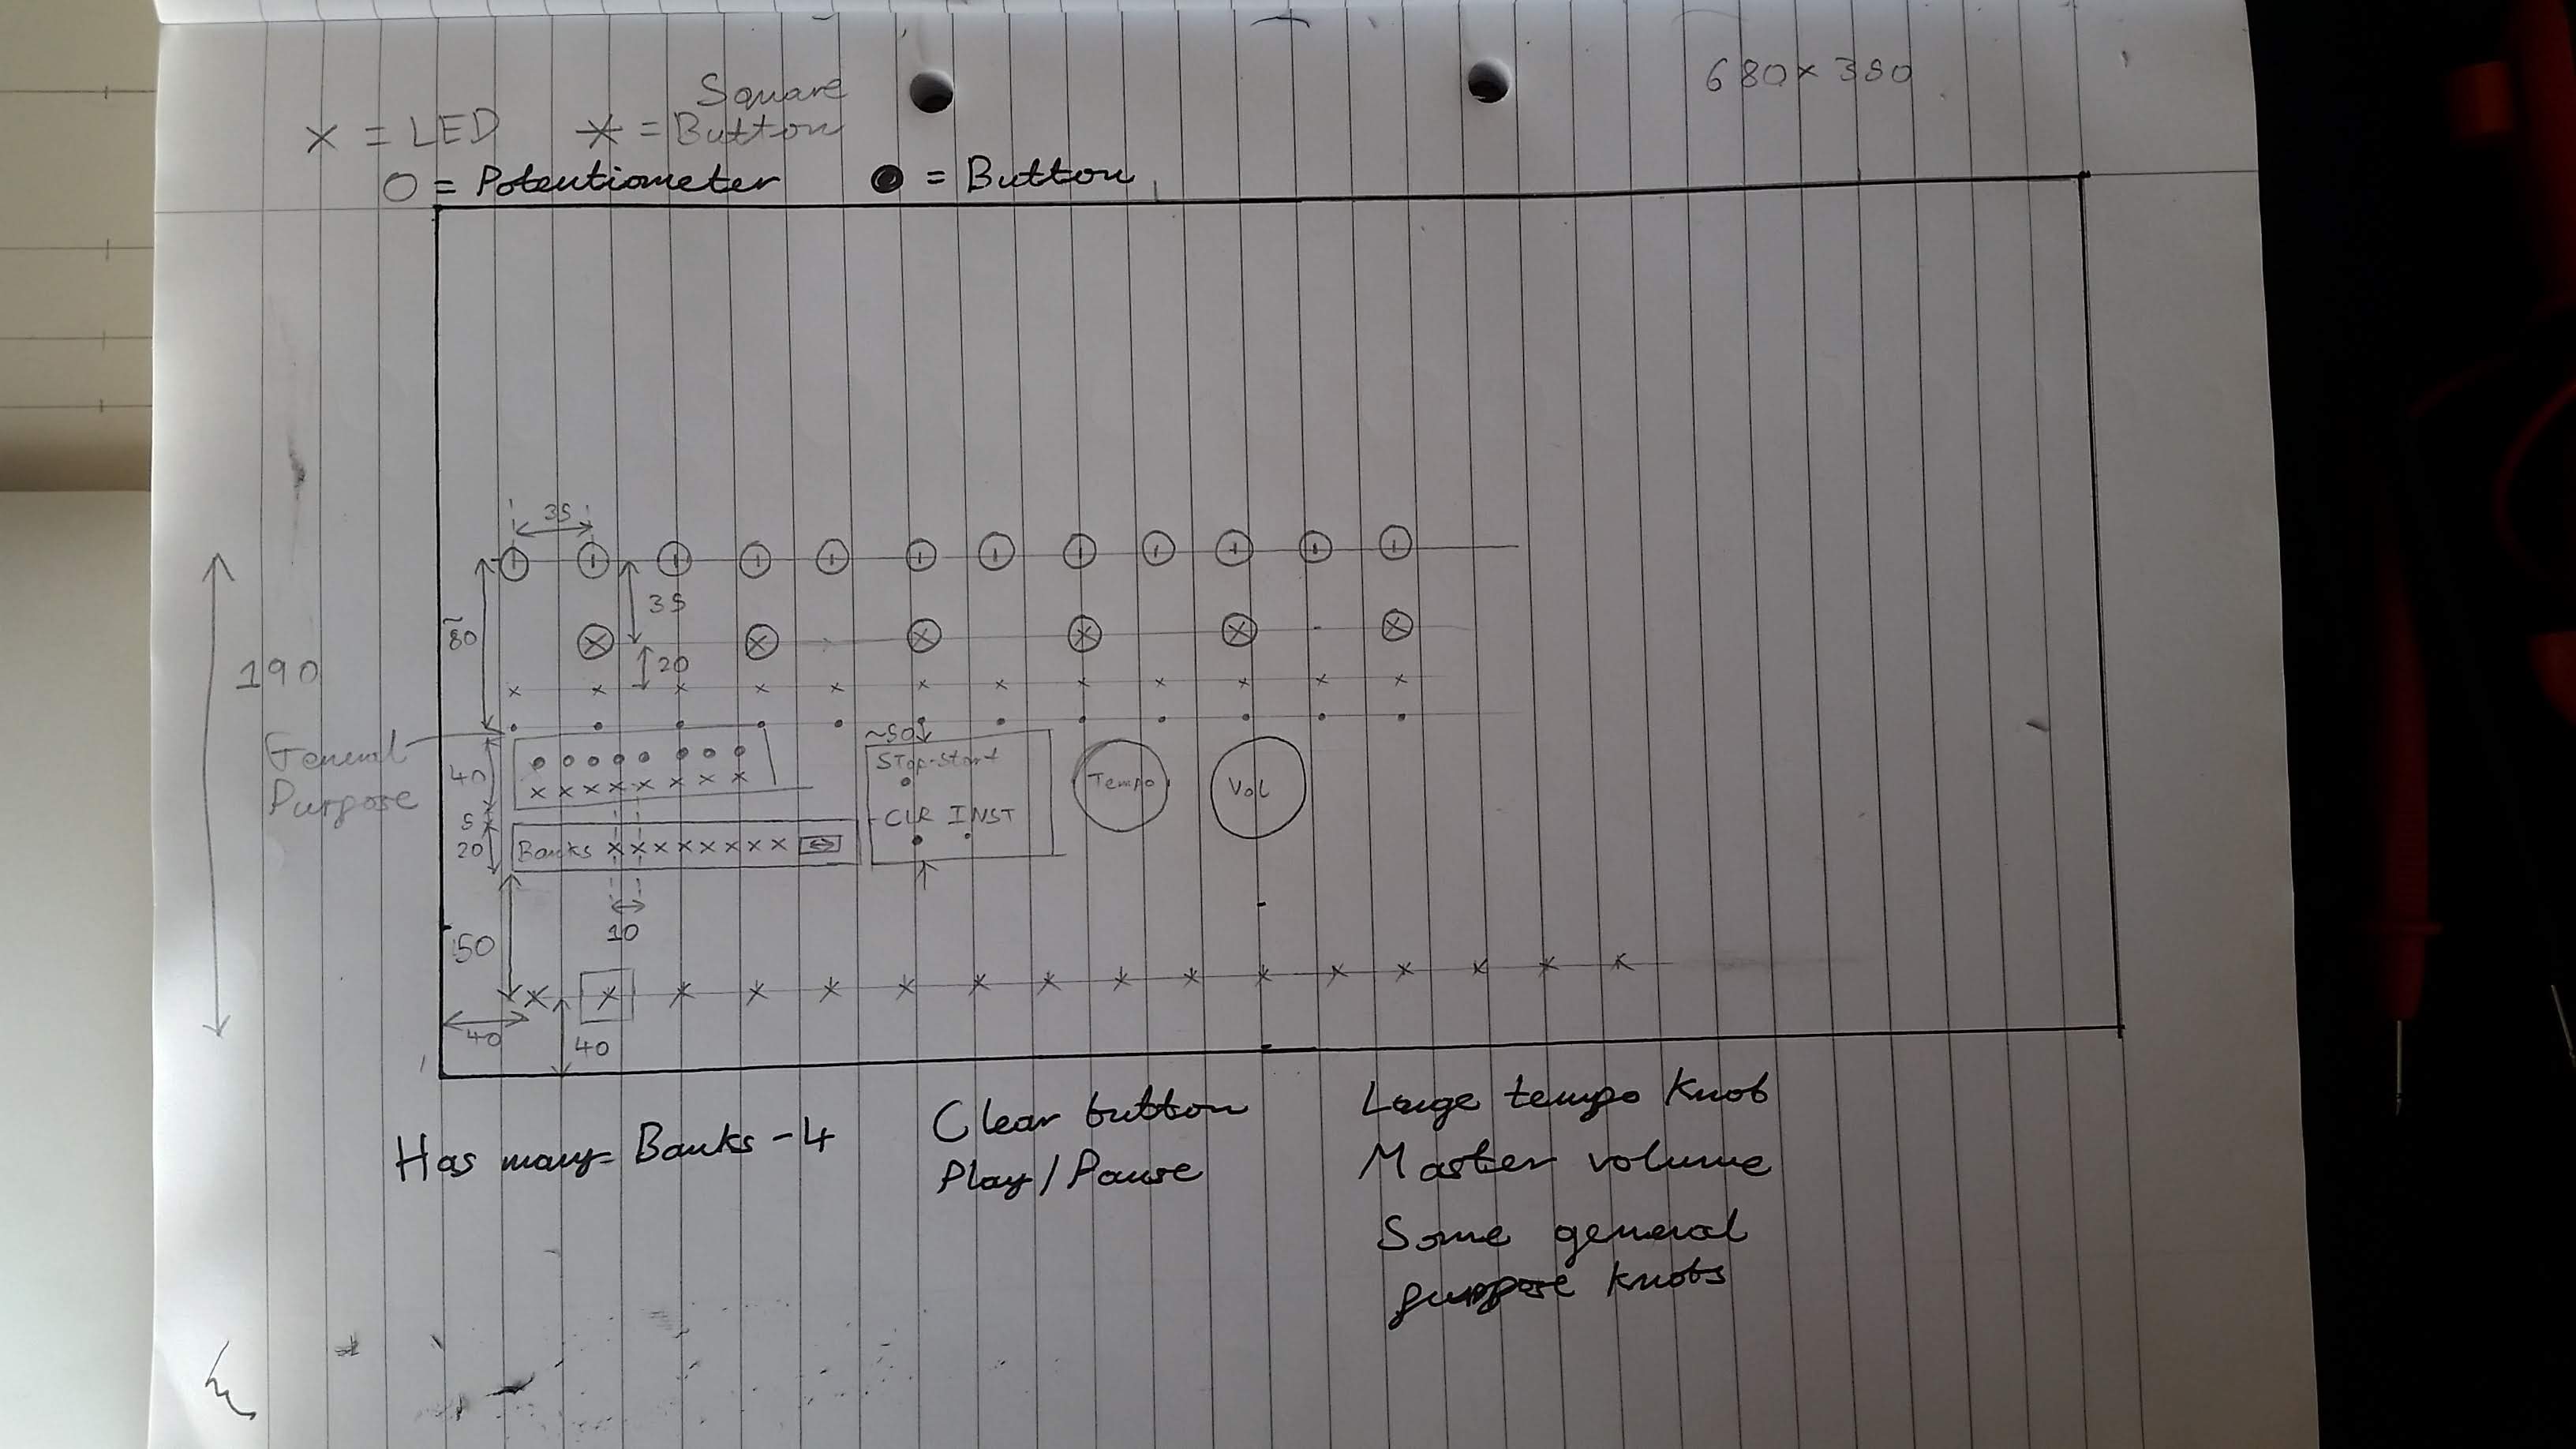 Mockup of controls layout on paper